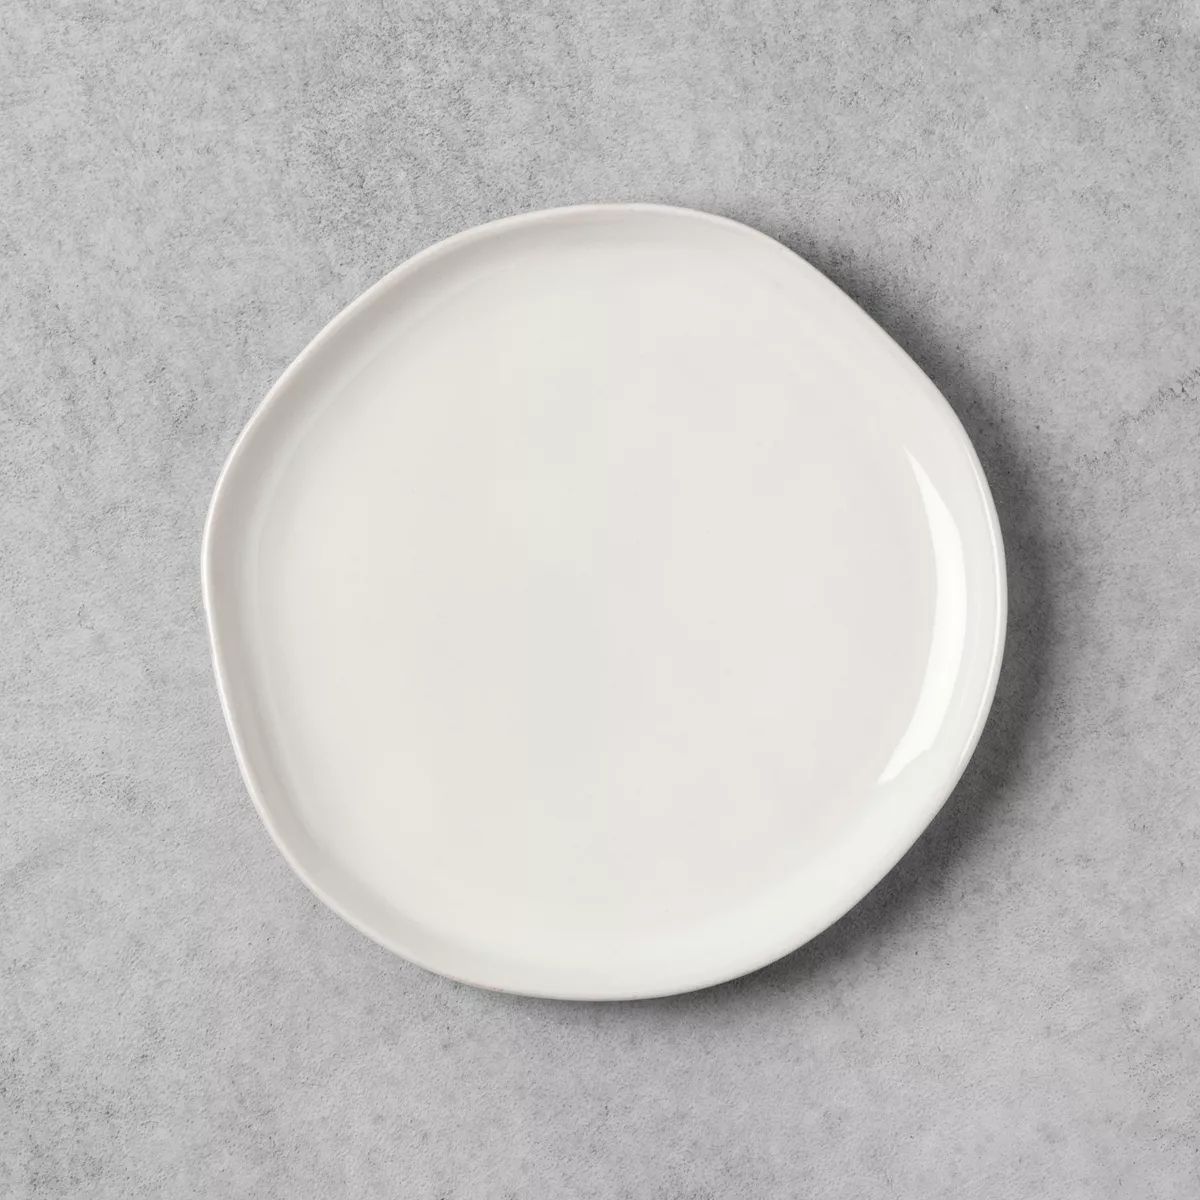 8" Stoneware Salad Plate - Hearth & Hand™ with Magnolia | Target